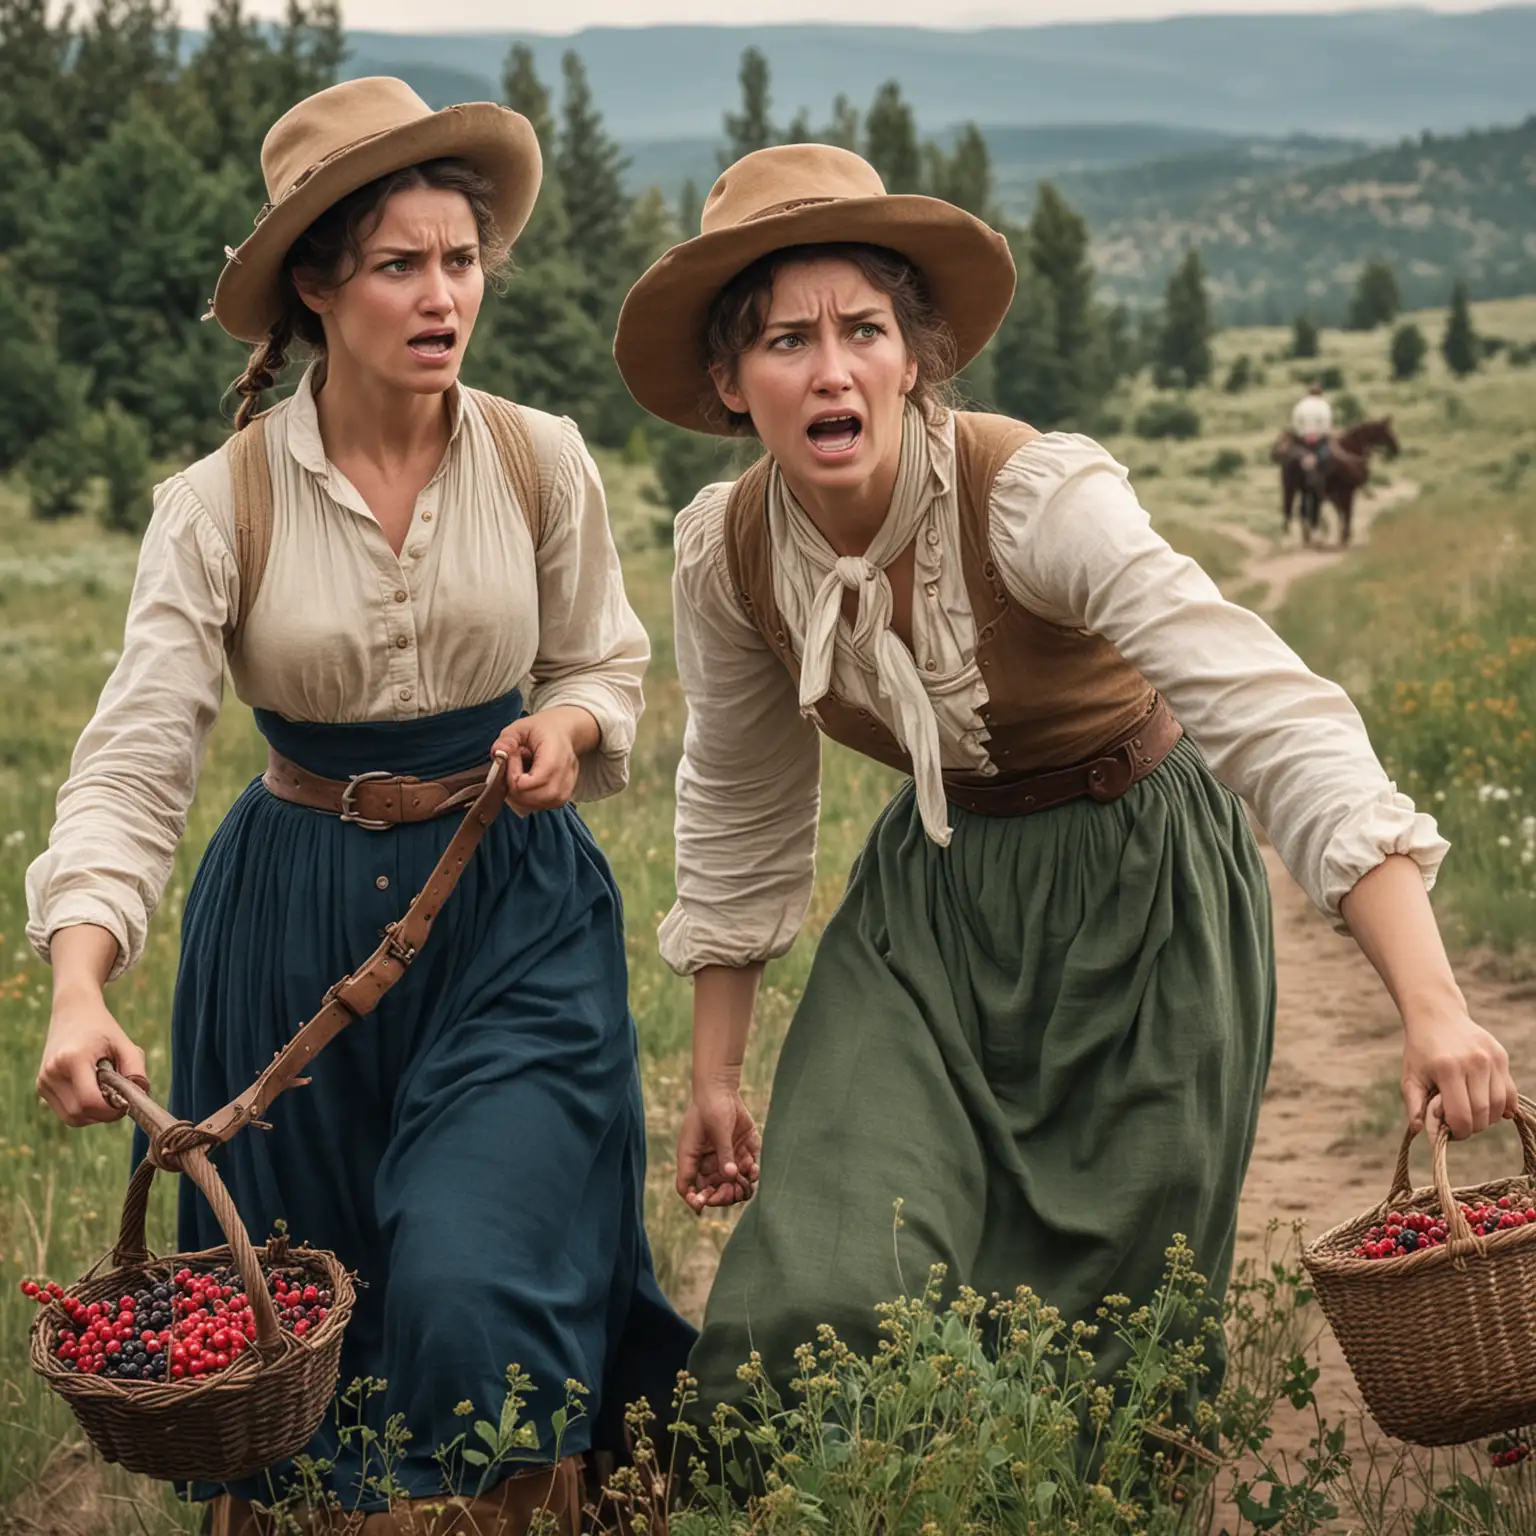 Pioneer Women on the Oregon Trail Determined Harvest and Worried Companion